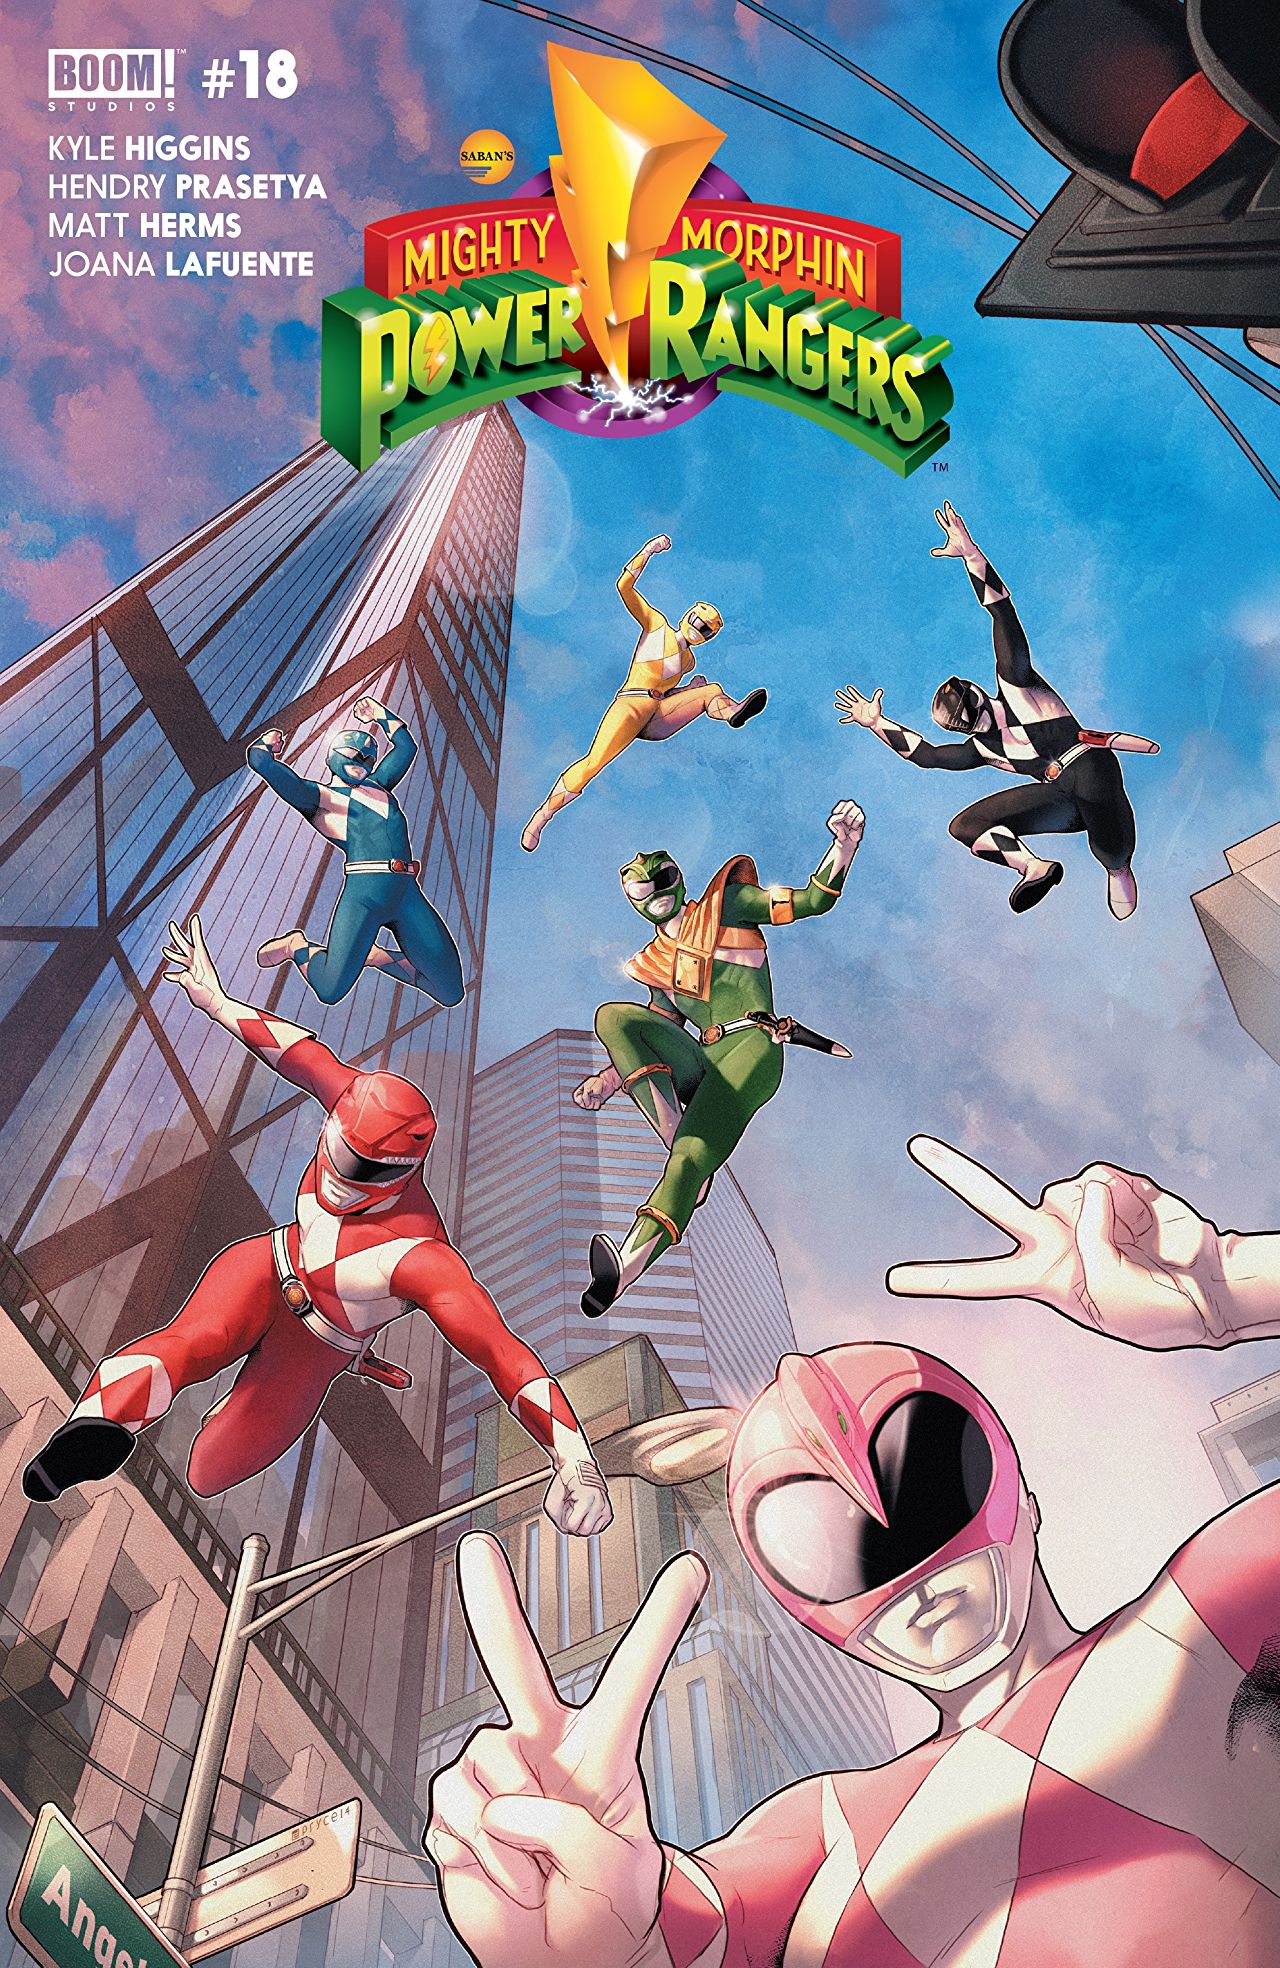 Mighty Morphin Power Rangers #18 Review